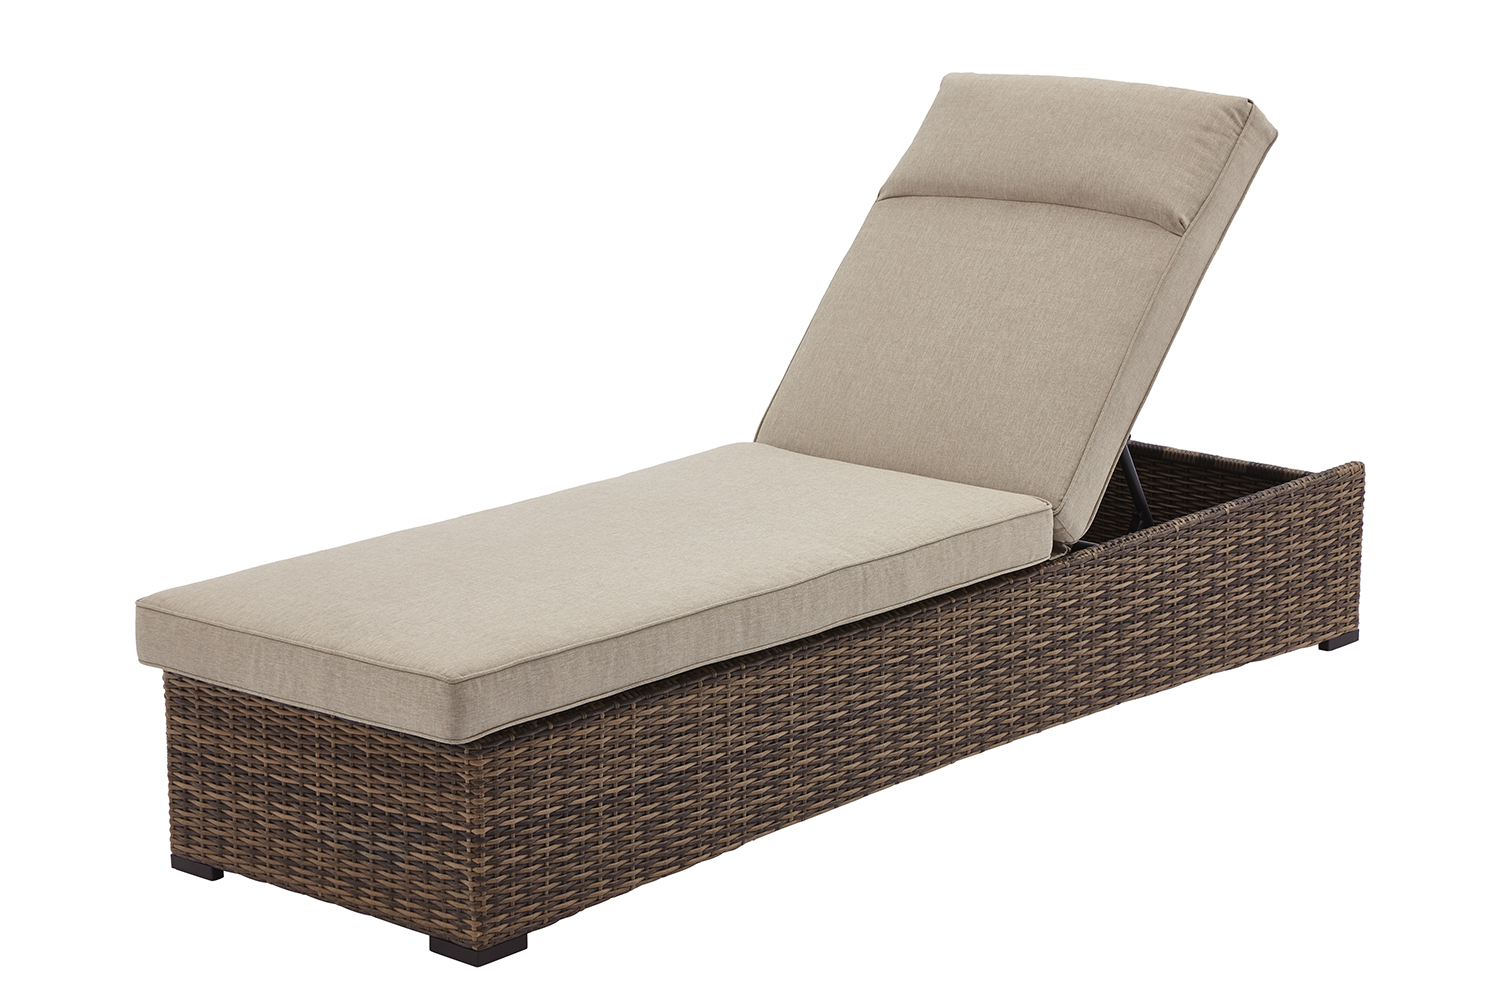 Better Homes & Gardens Hawthorne Park Outdoor Chaise Lounge